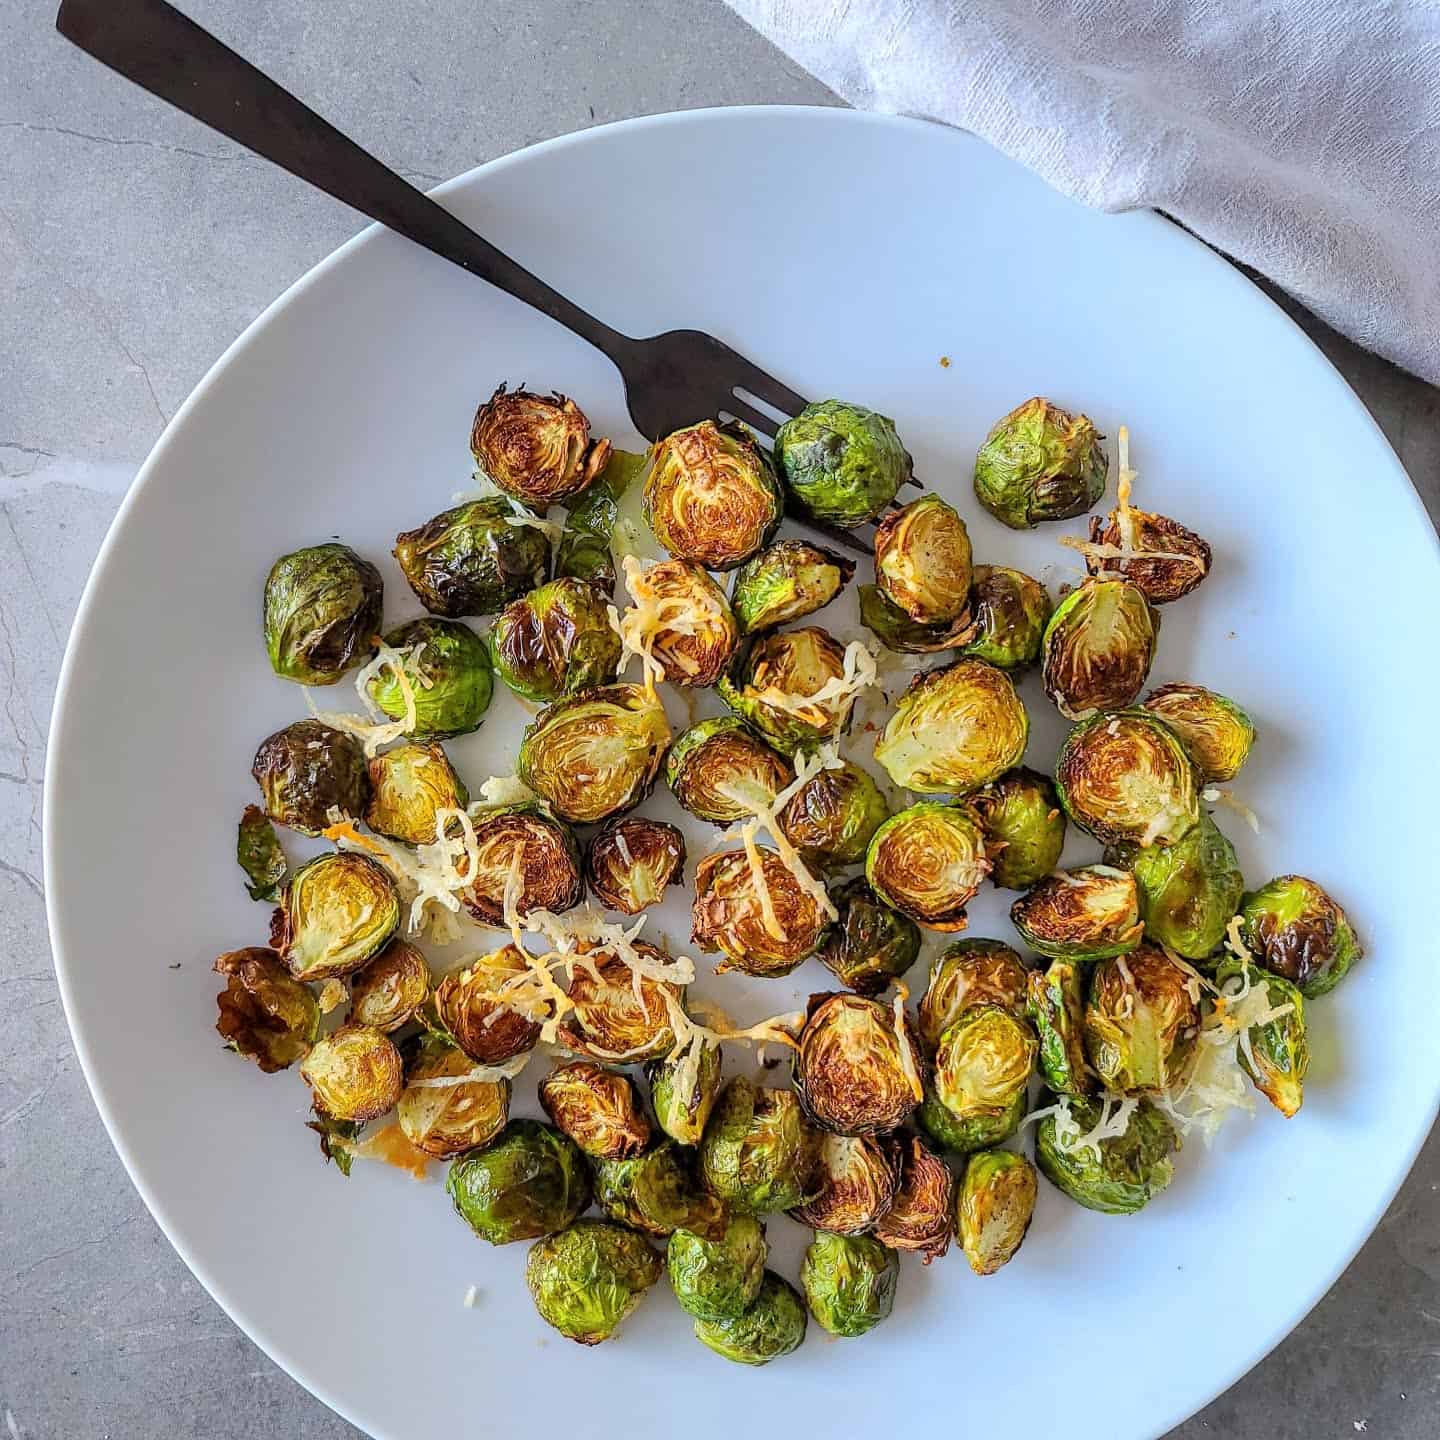 Air Fryer Brussel Sprouts with parmesan served on a plate